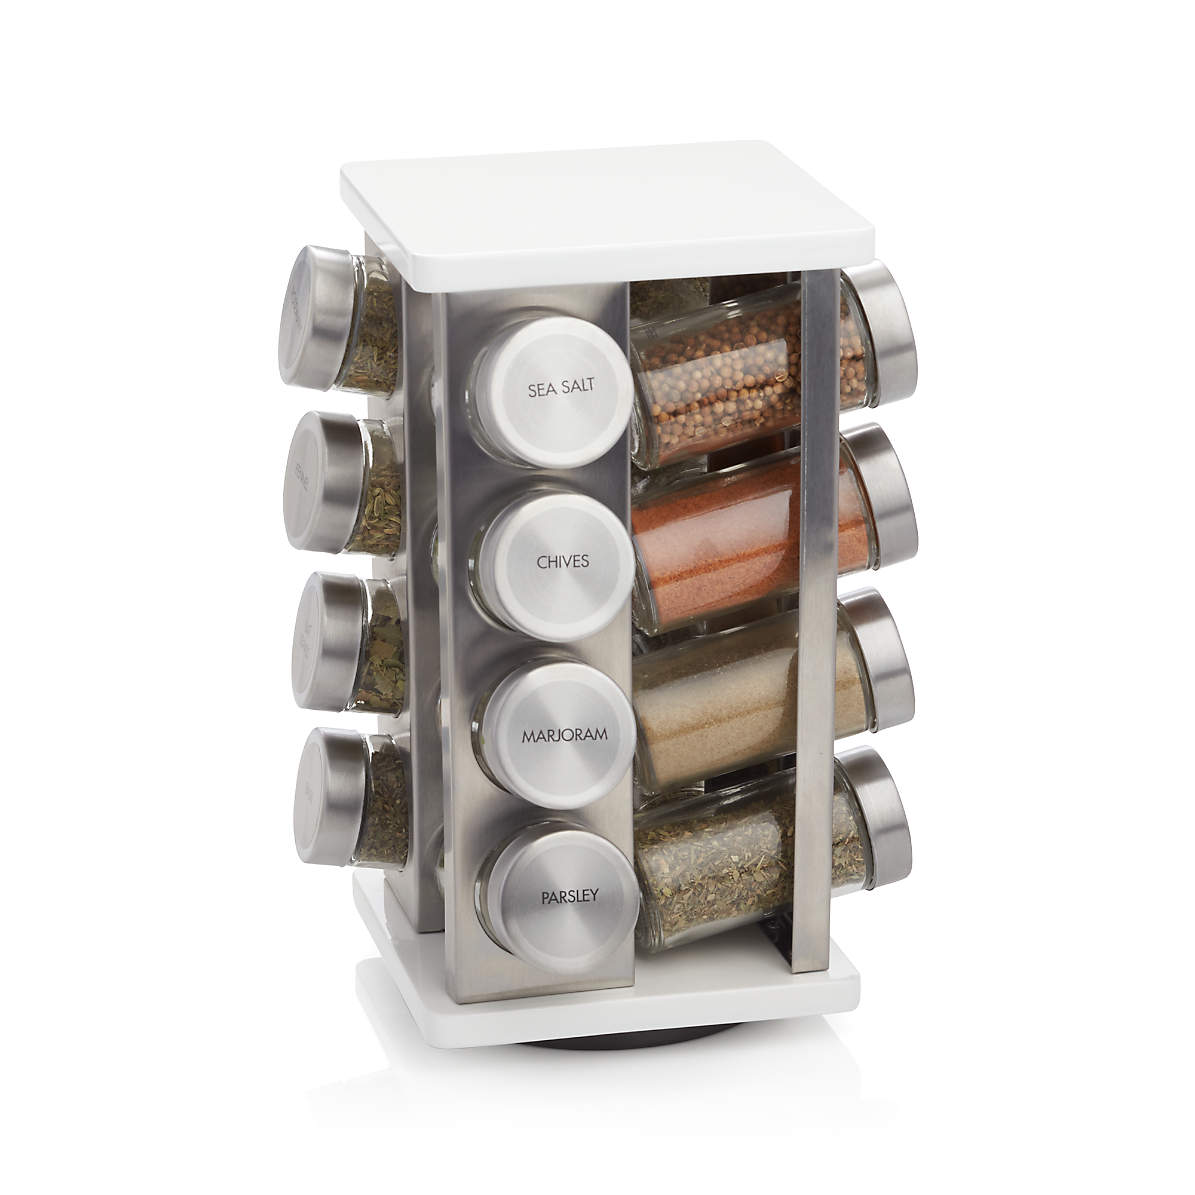 This Awesome Spinning Spice Rack Carousel Has An Auto Measuring Feature For  Each Spice